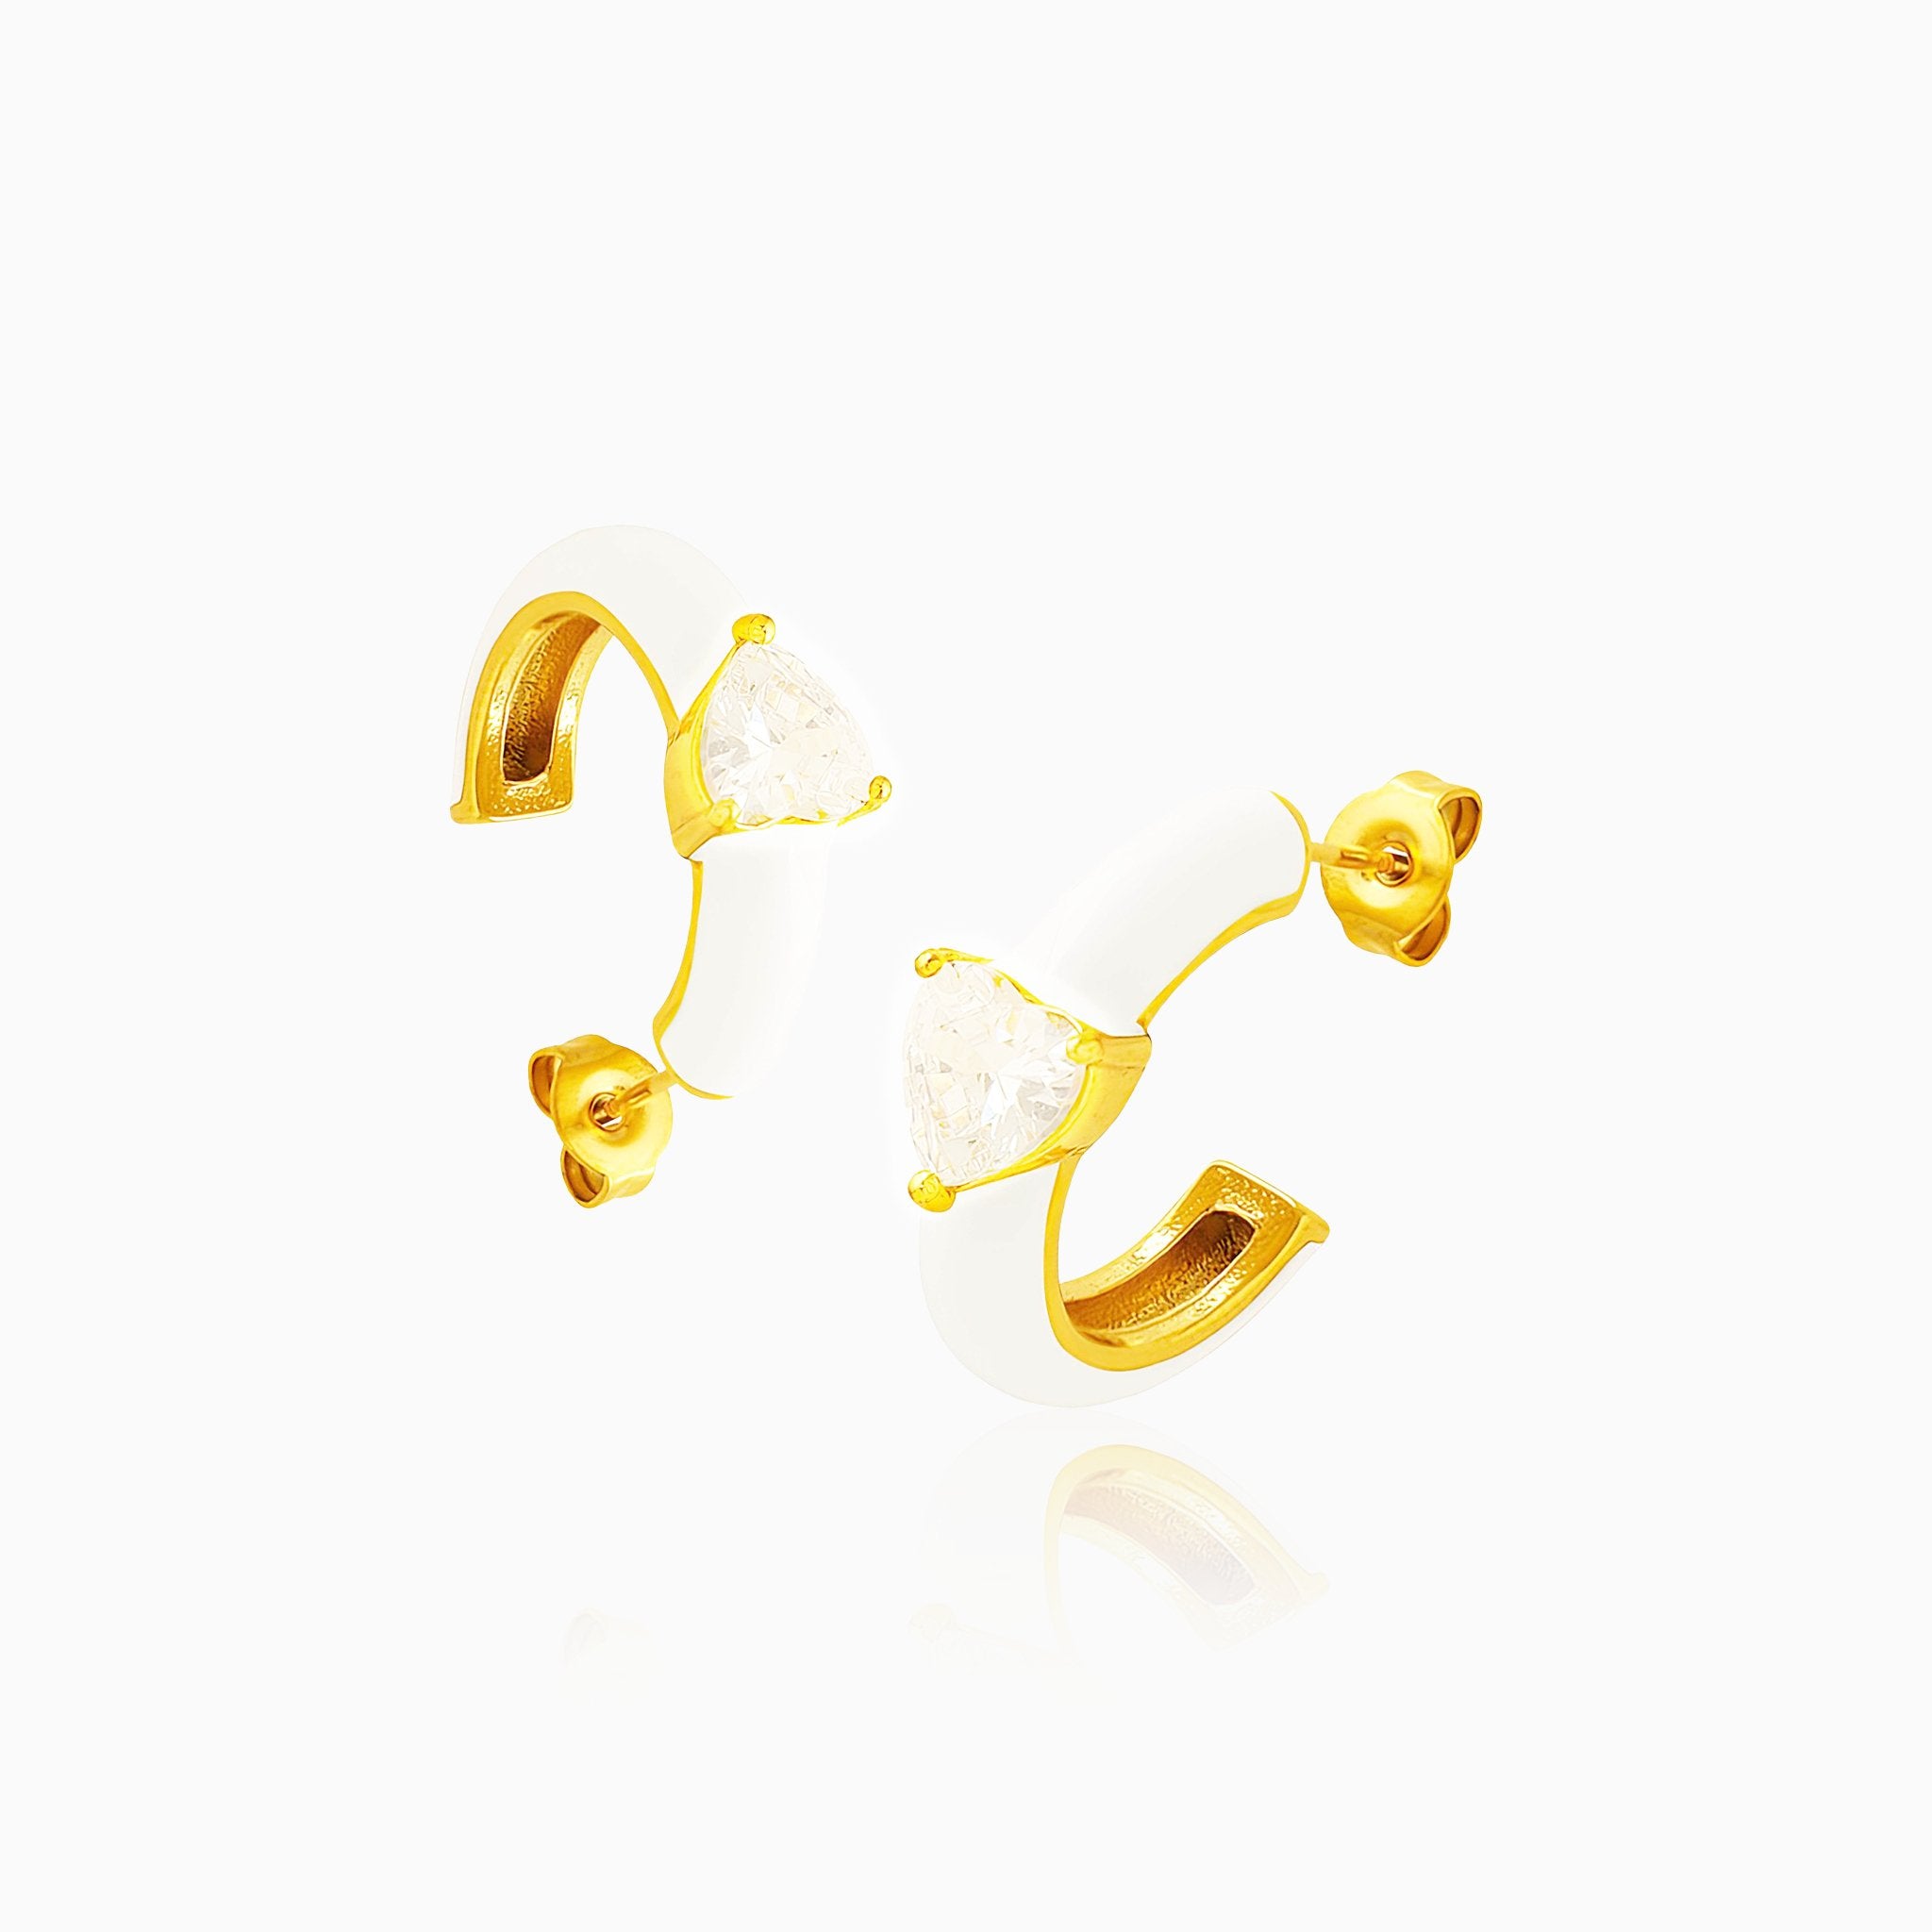 Dazzling C-shaped Earrings - Nobbier - Earring - 18K Gold And Titanium PVD Coated Jewelry